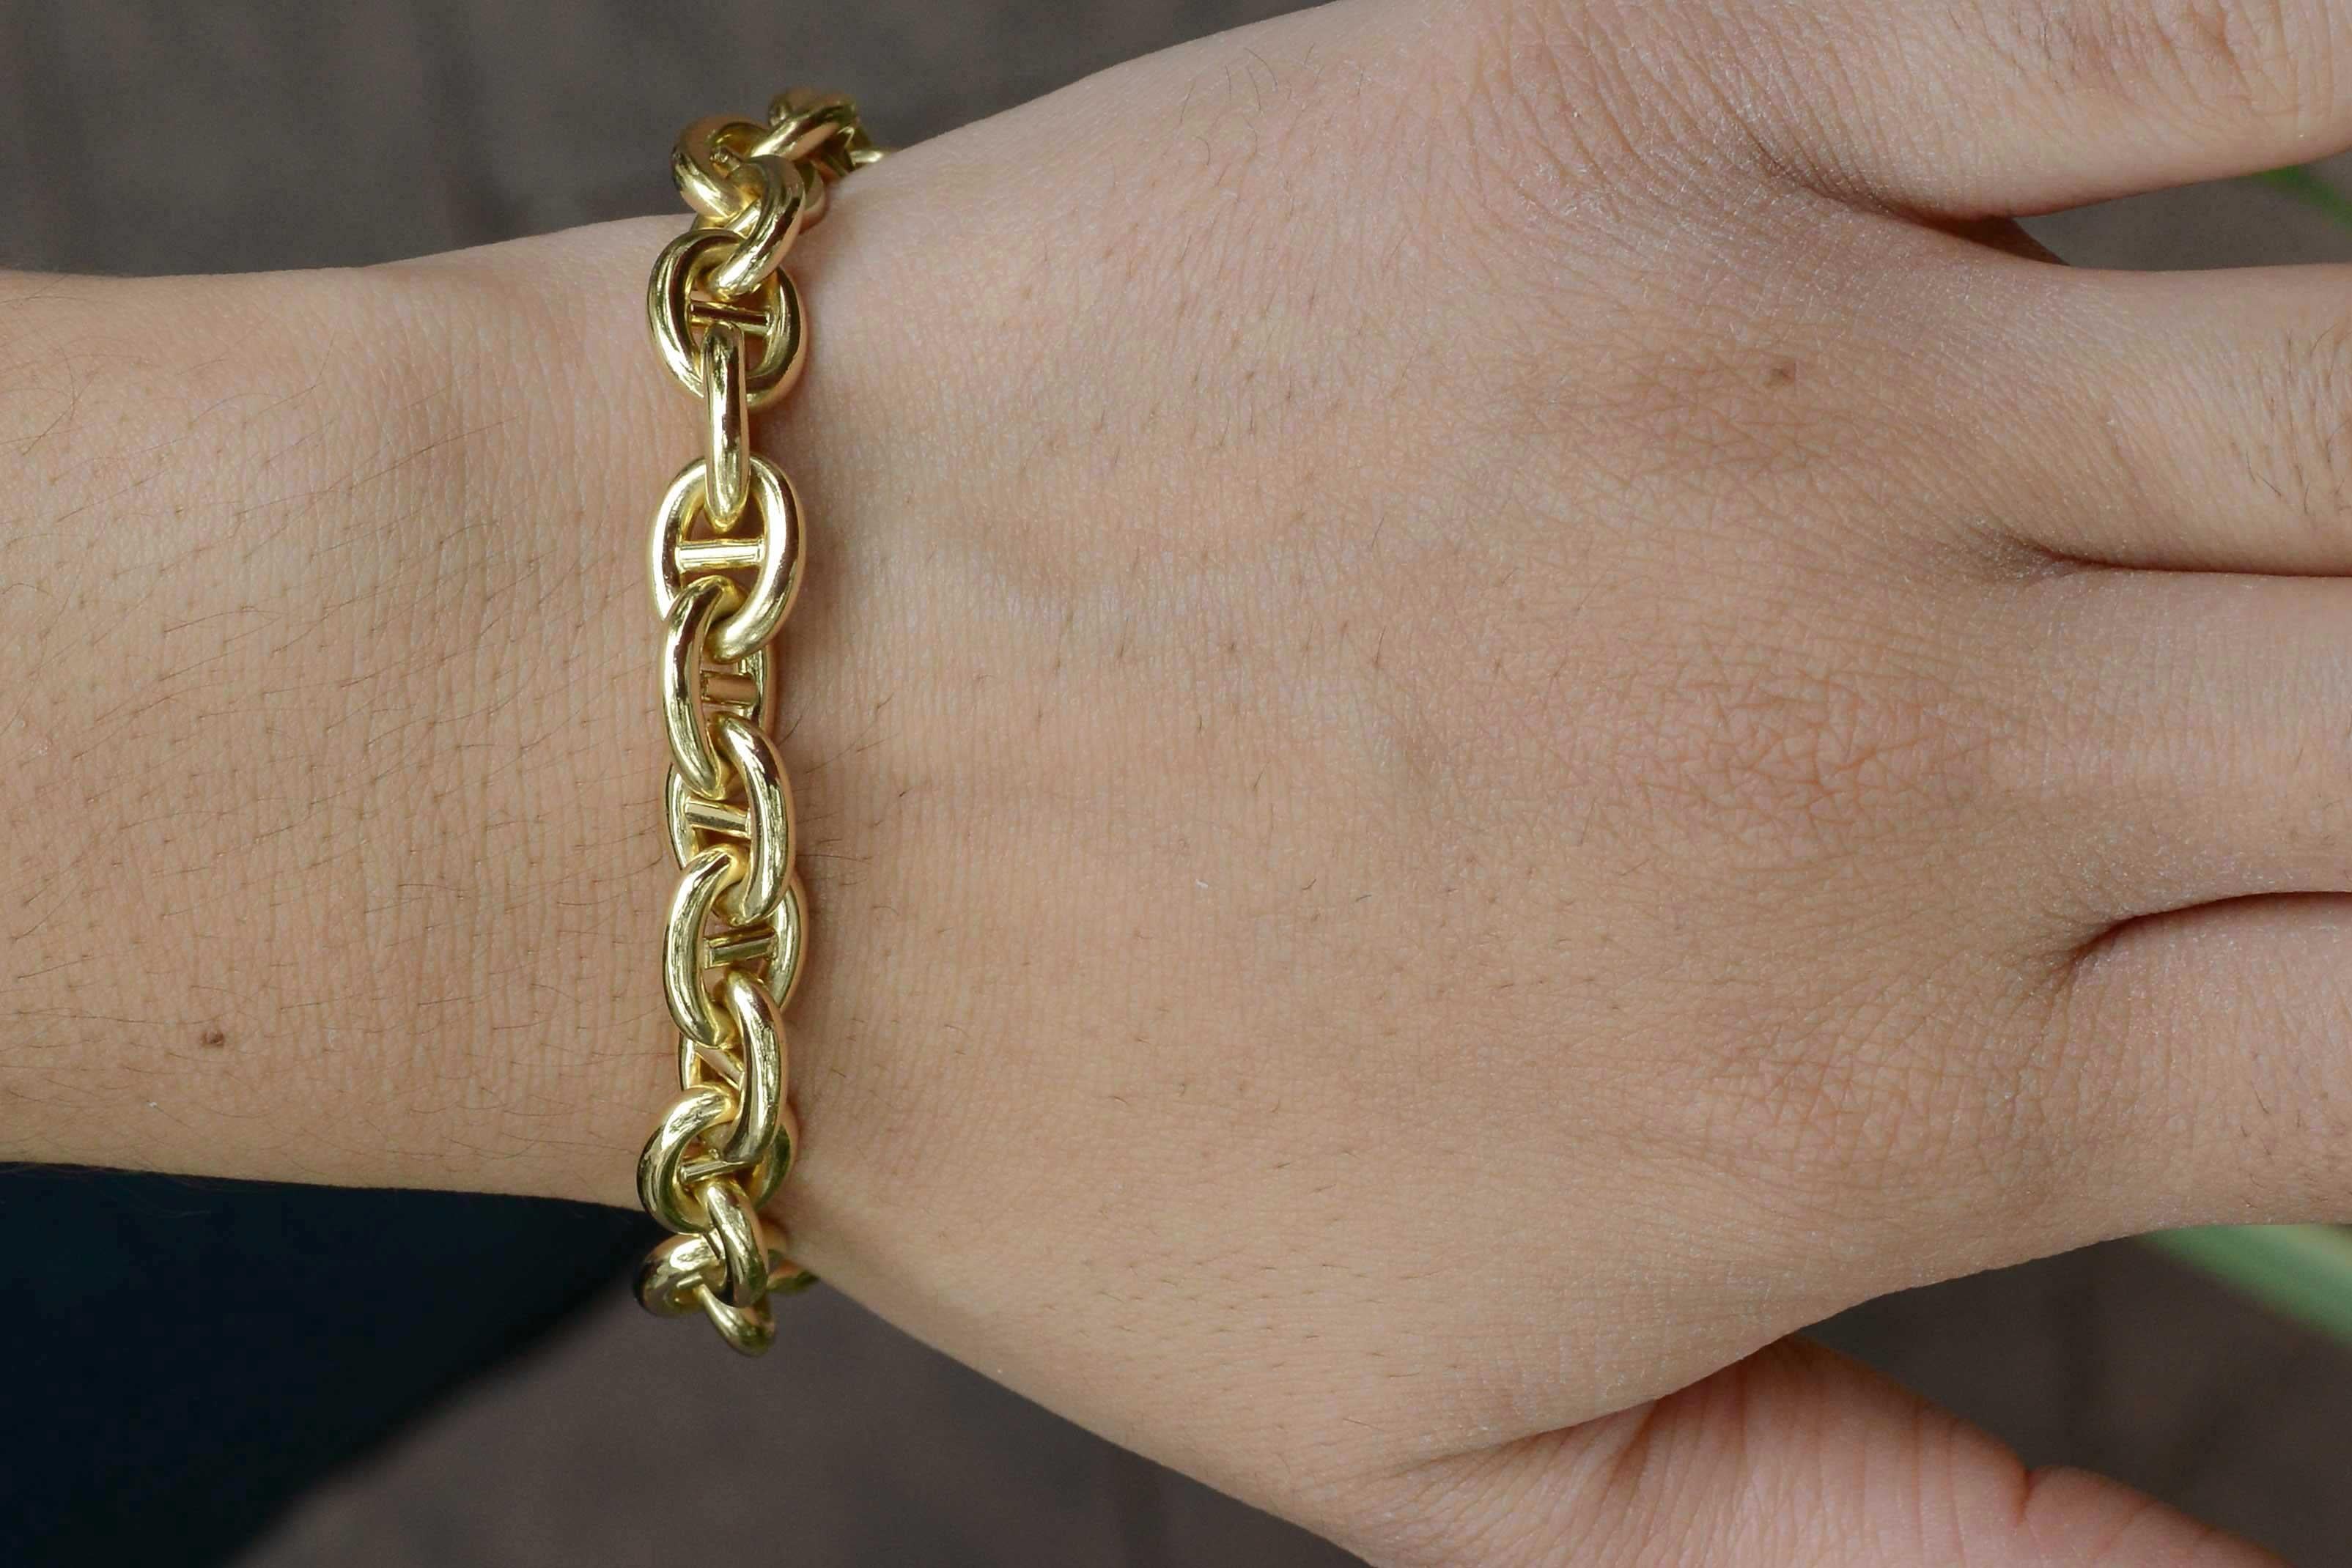 From the iconic House of Cartier comes this heavy 18K gold link bracelet. At 8